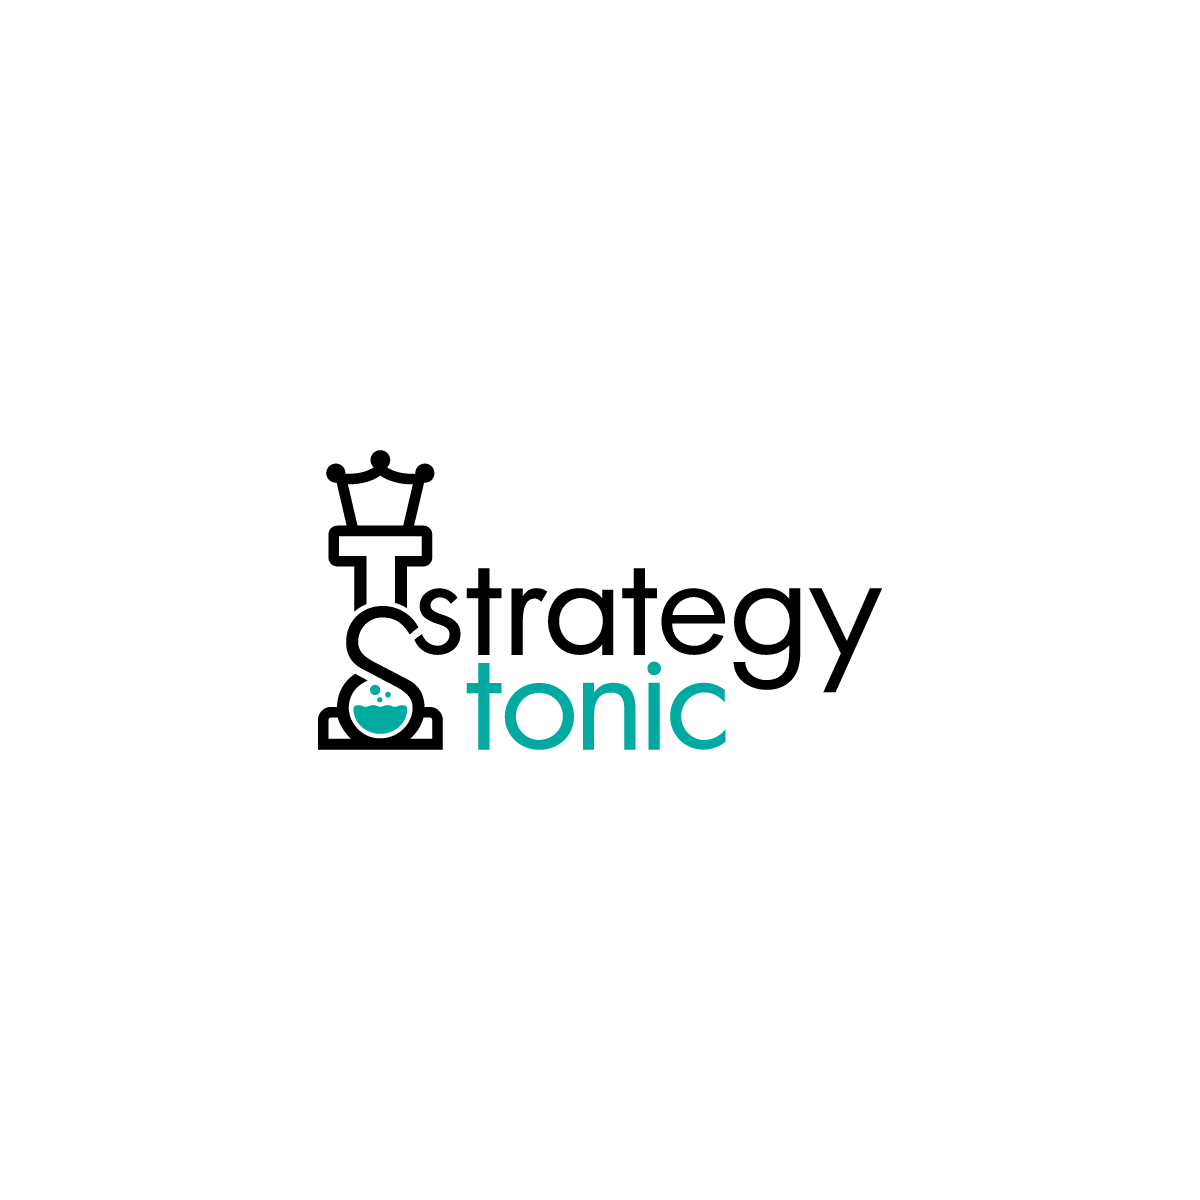 VEESION logos_Strategy tonic